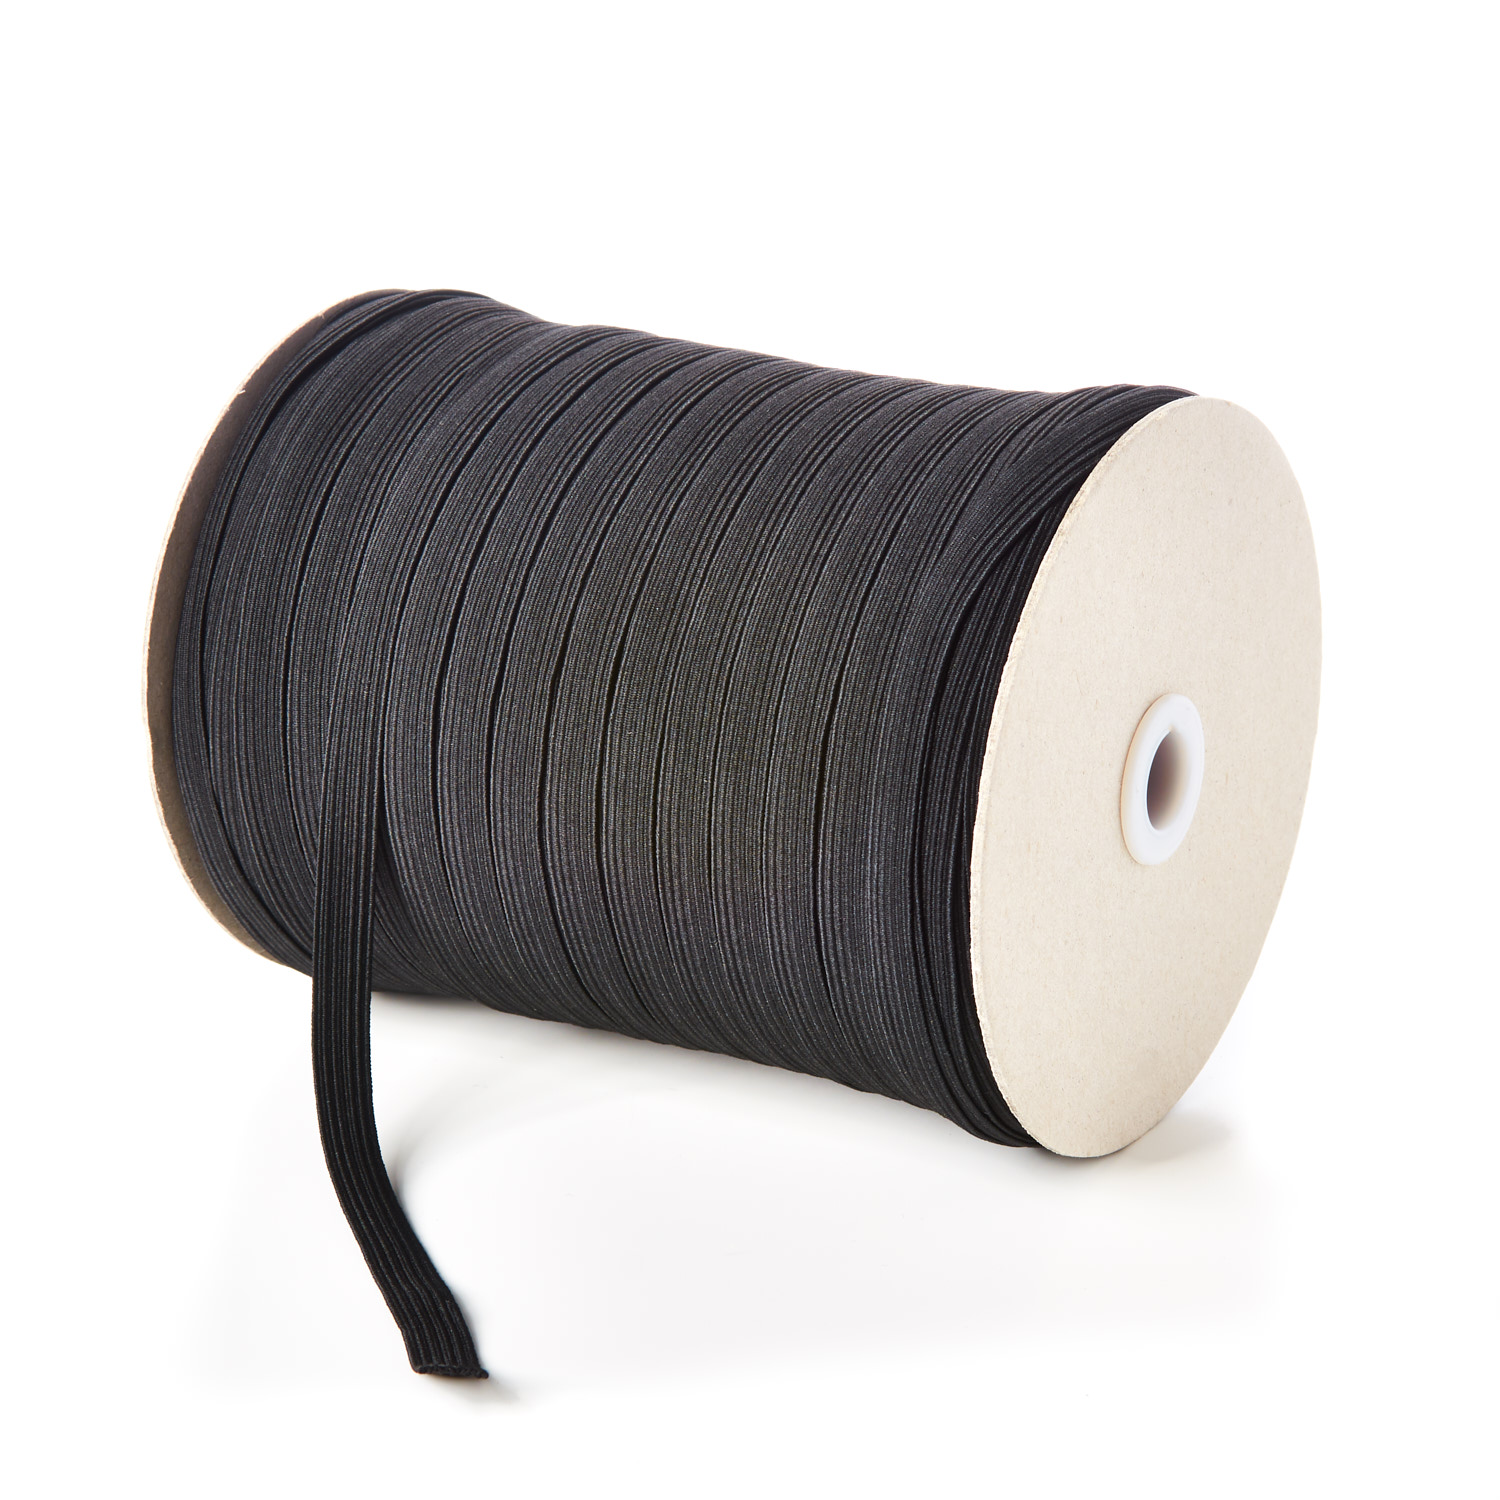 10mm 12 Cord Flat Elastic Black Leicester Manufacturer Braided Corded Trimming Tailors Dress Making